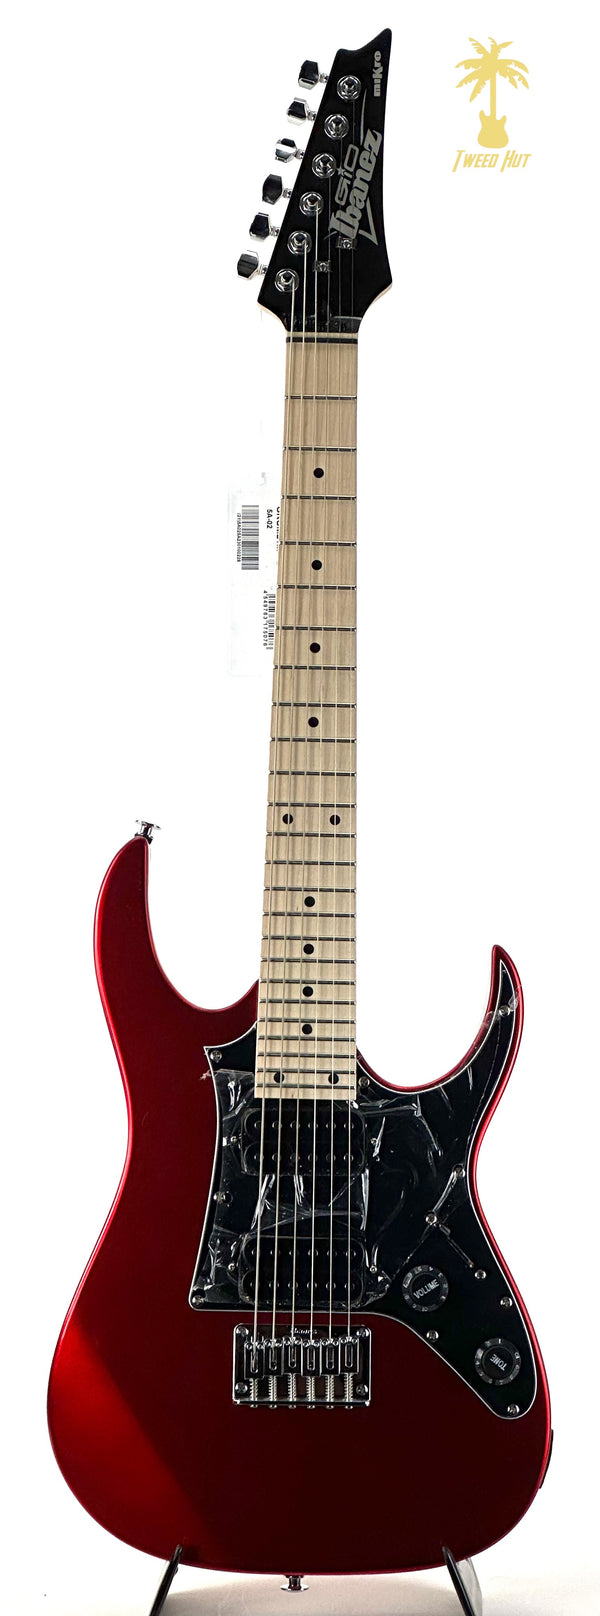 IBANEZ MIKRO GRGM21MCA ELECTRIC GUITAR - CANDY APPLE RED